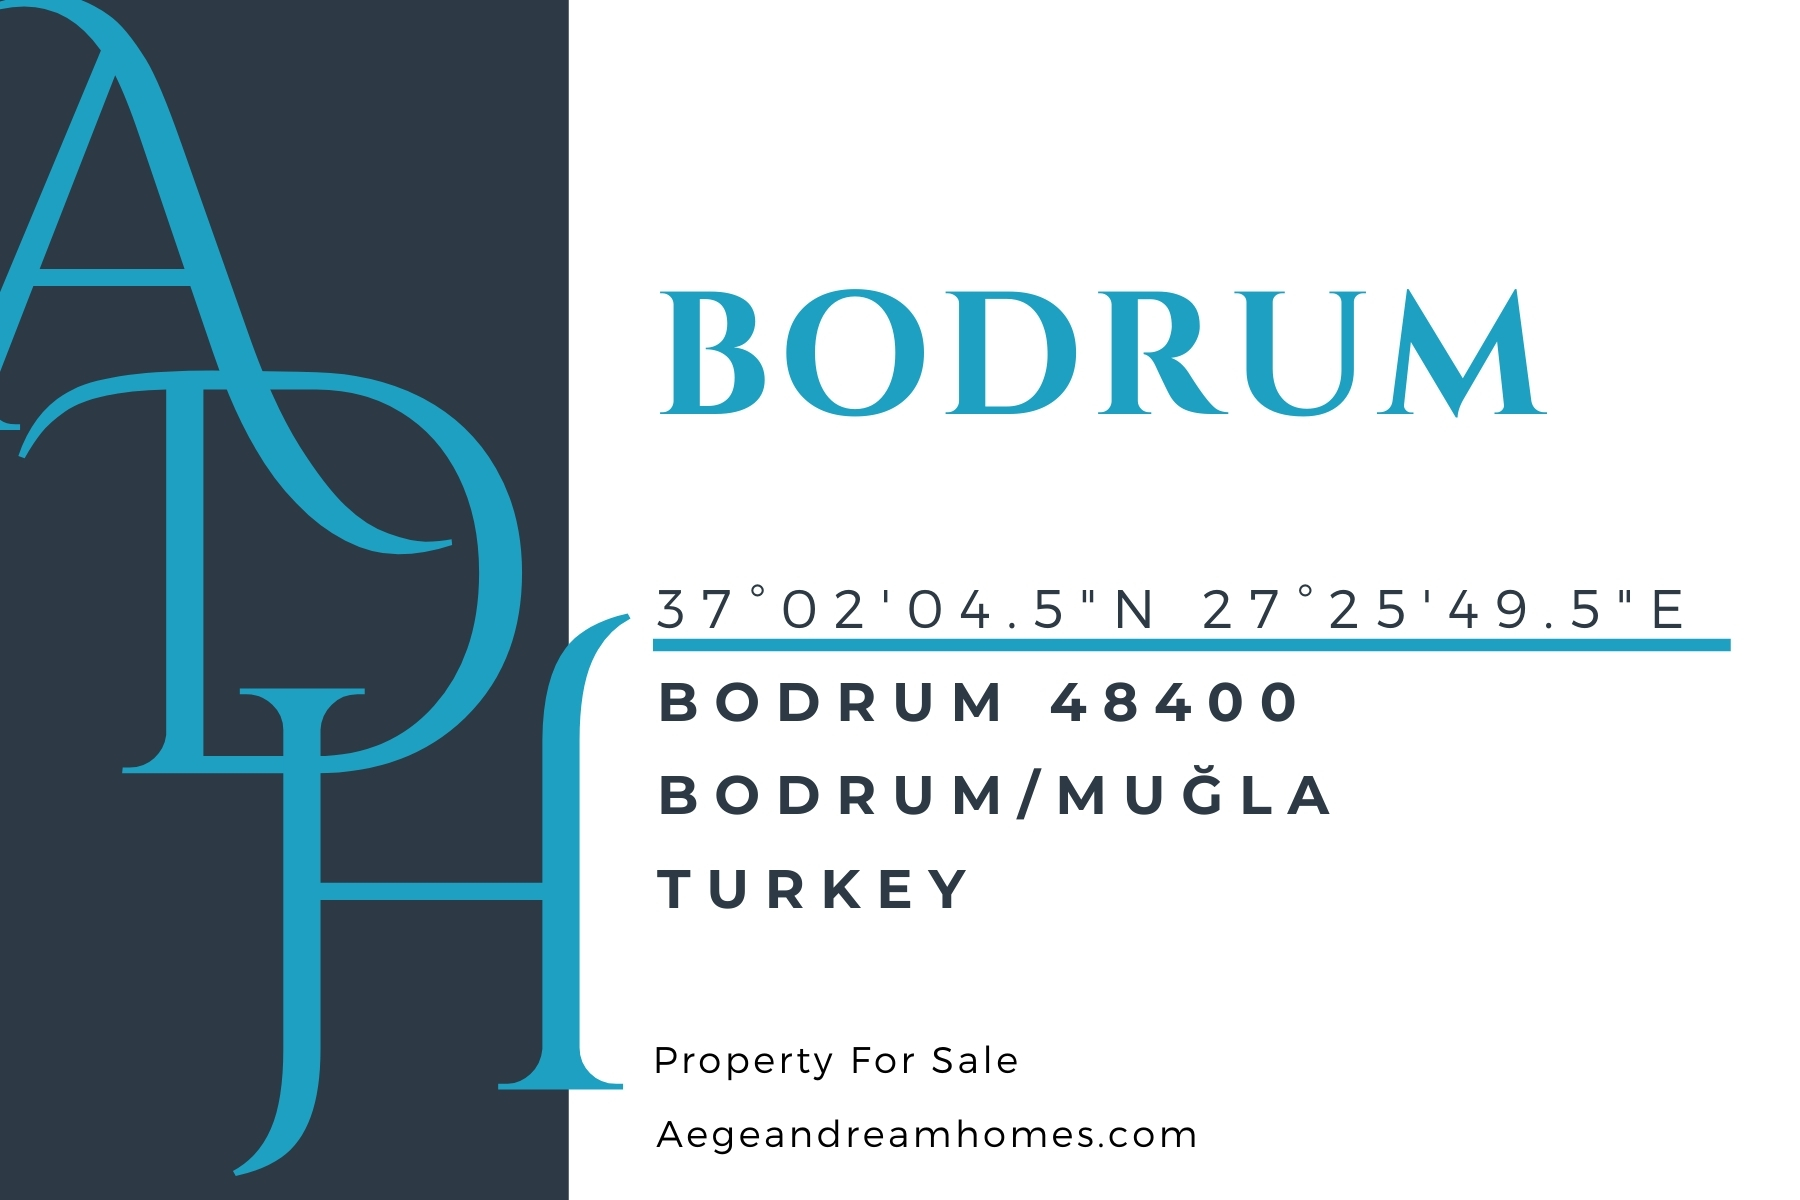 Bodrum postcard. Show Bodrum address and coordinates. Reads Bodrum property for sale..